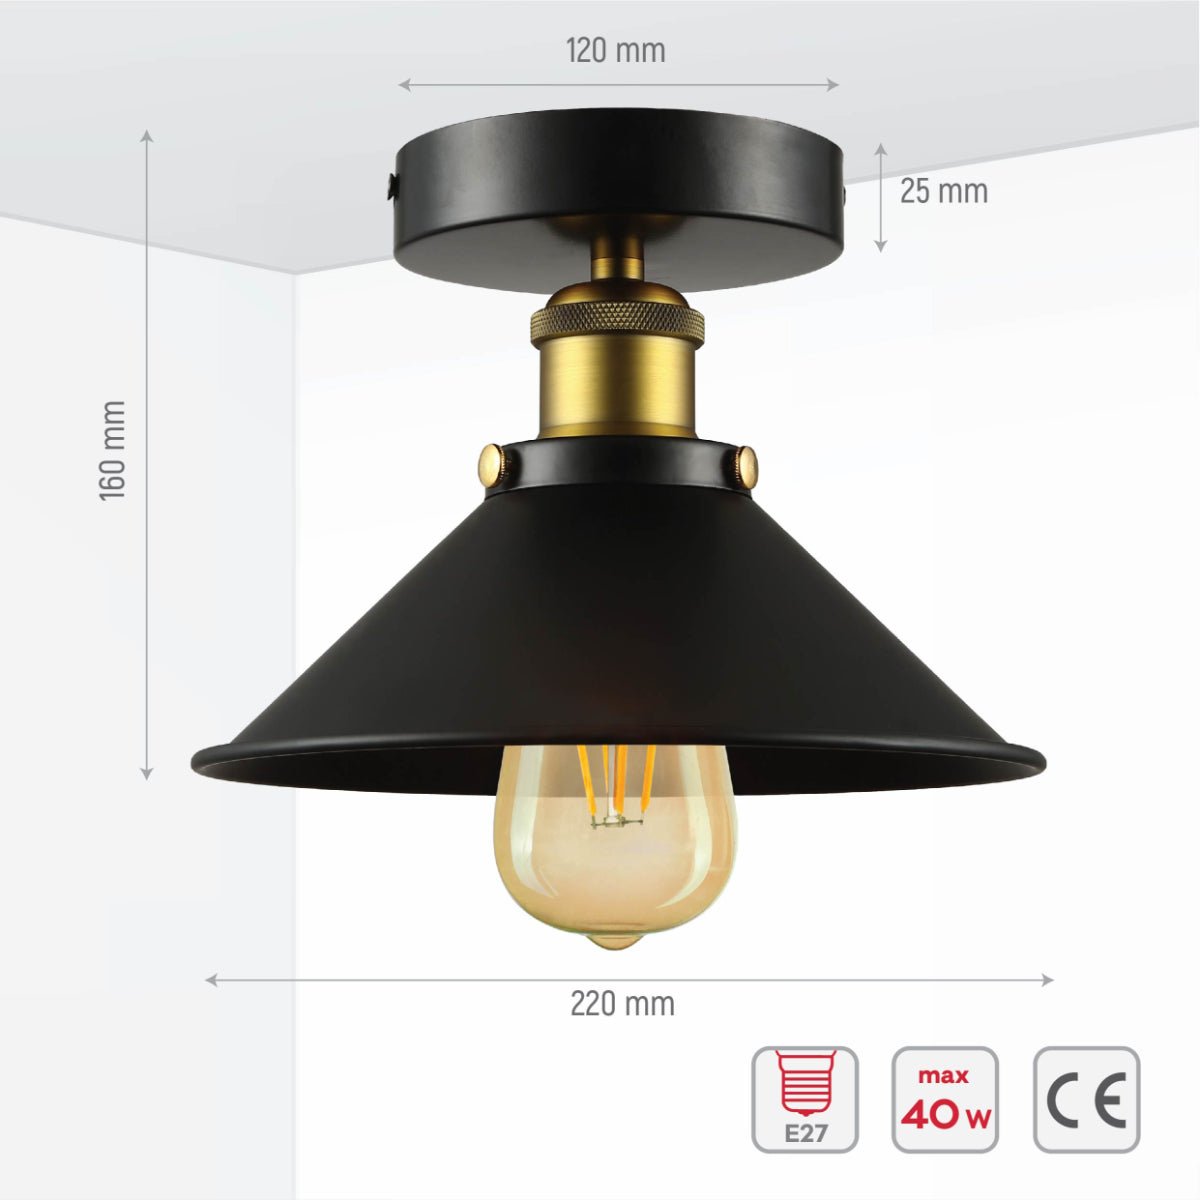 Size and specs of Black Metal Funnel Ceiling Light with E27 | TEKLED 150-17860